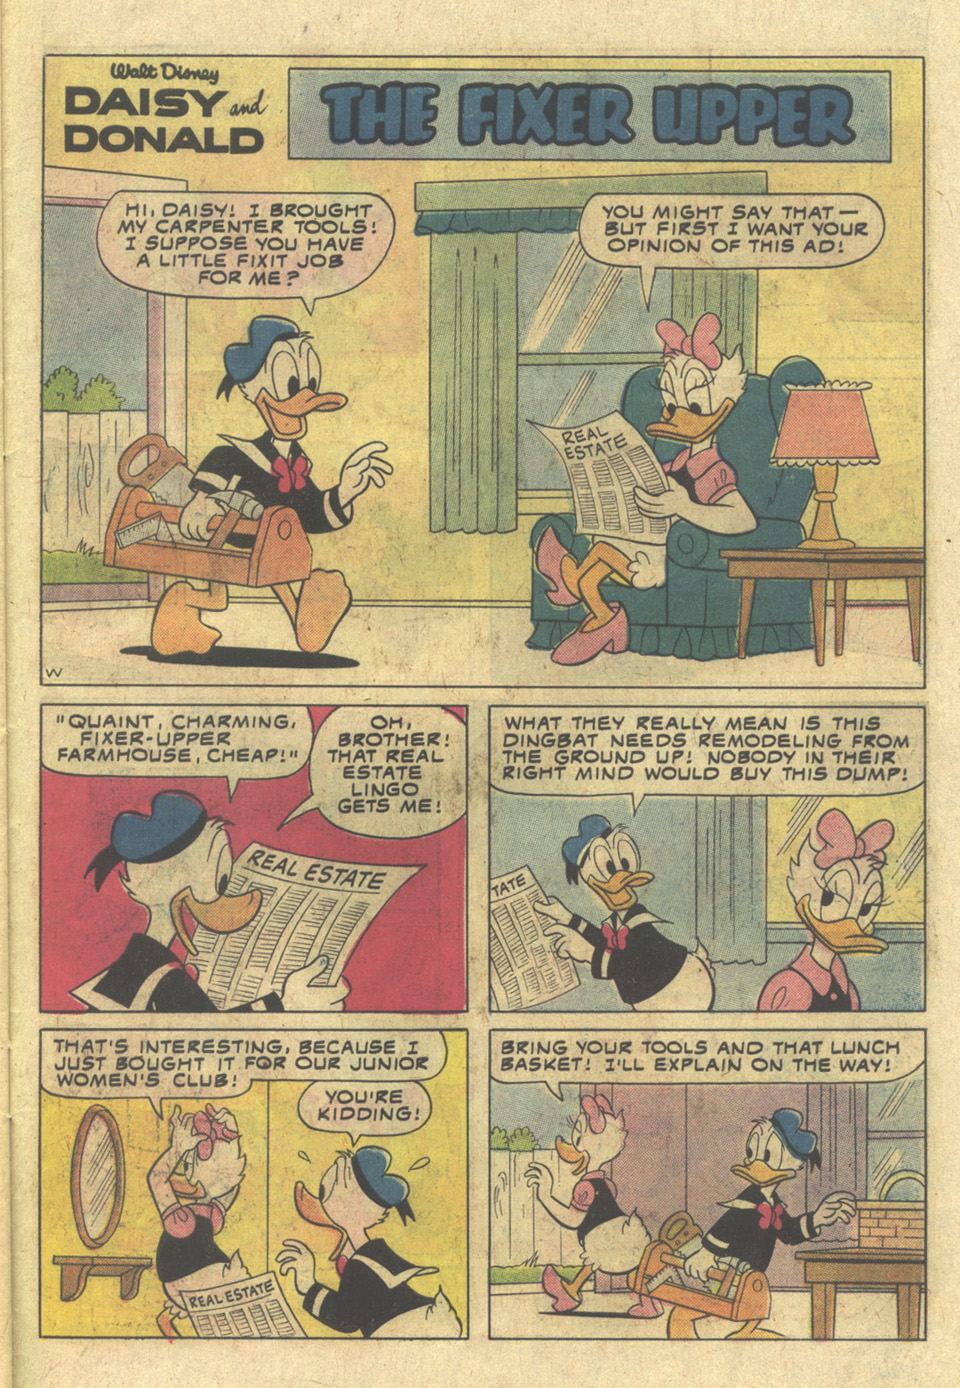 Read online Walt Disney Daisy and Donald comic -  Issue #8 - 27